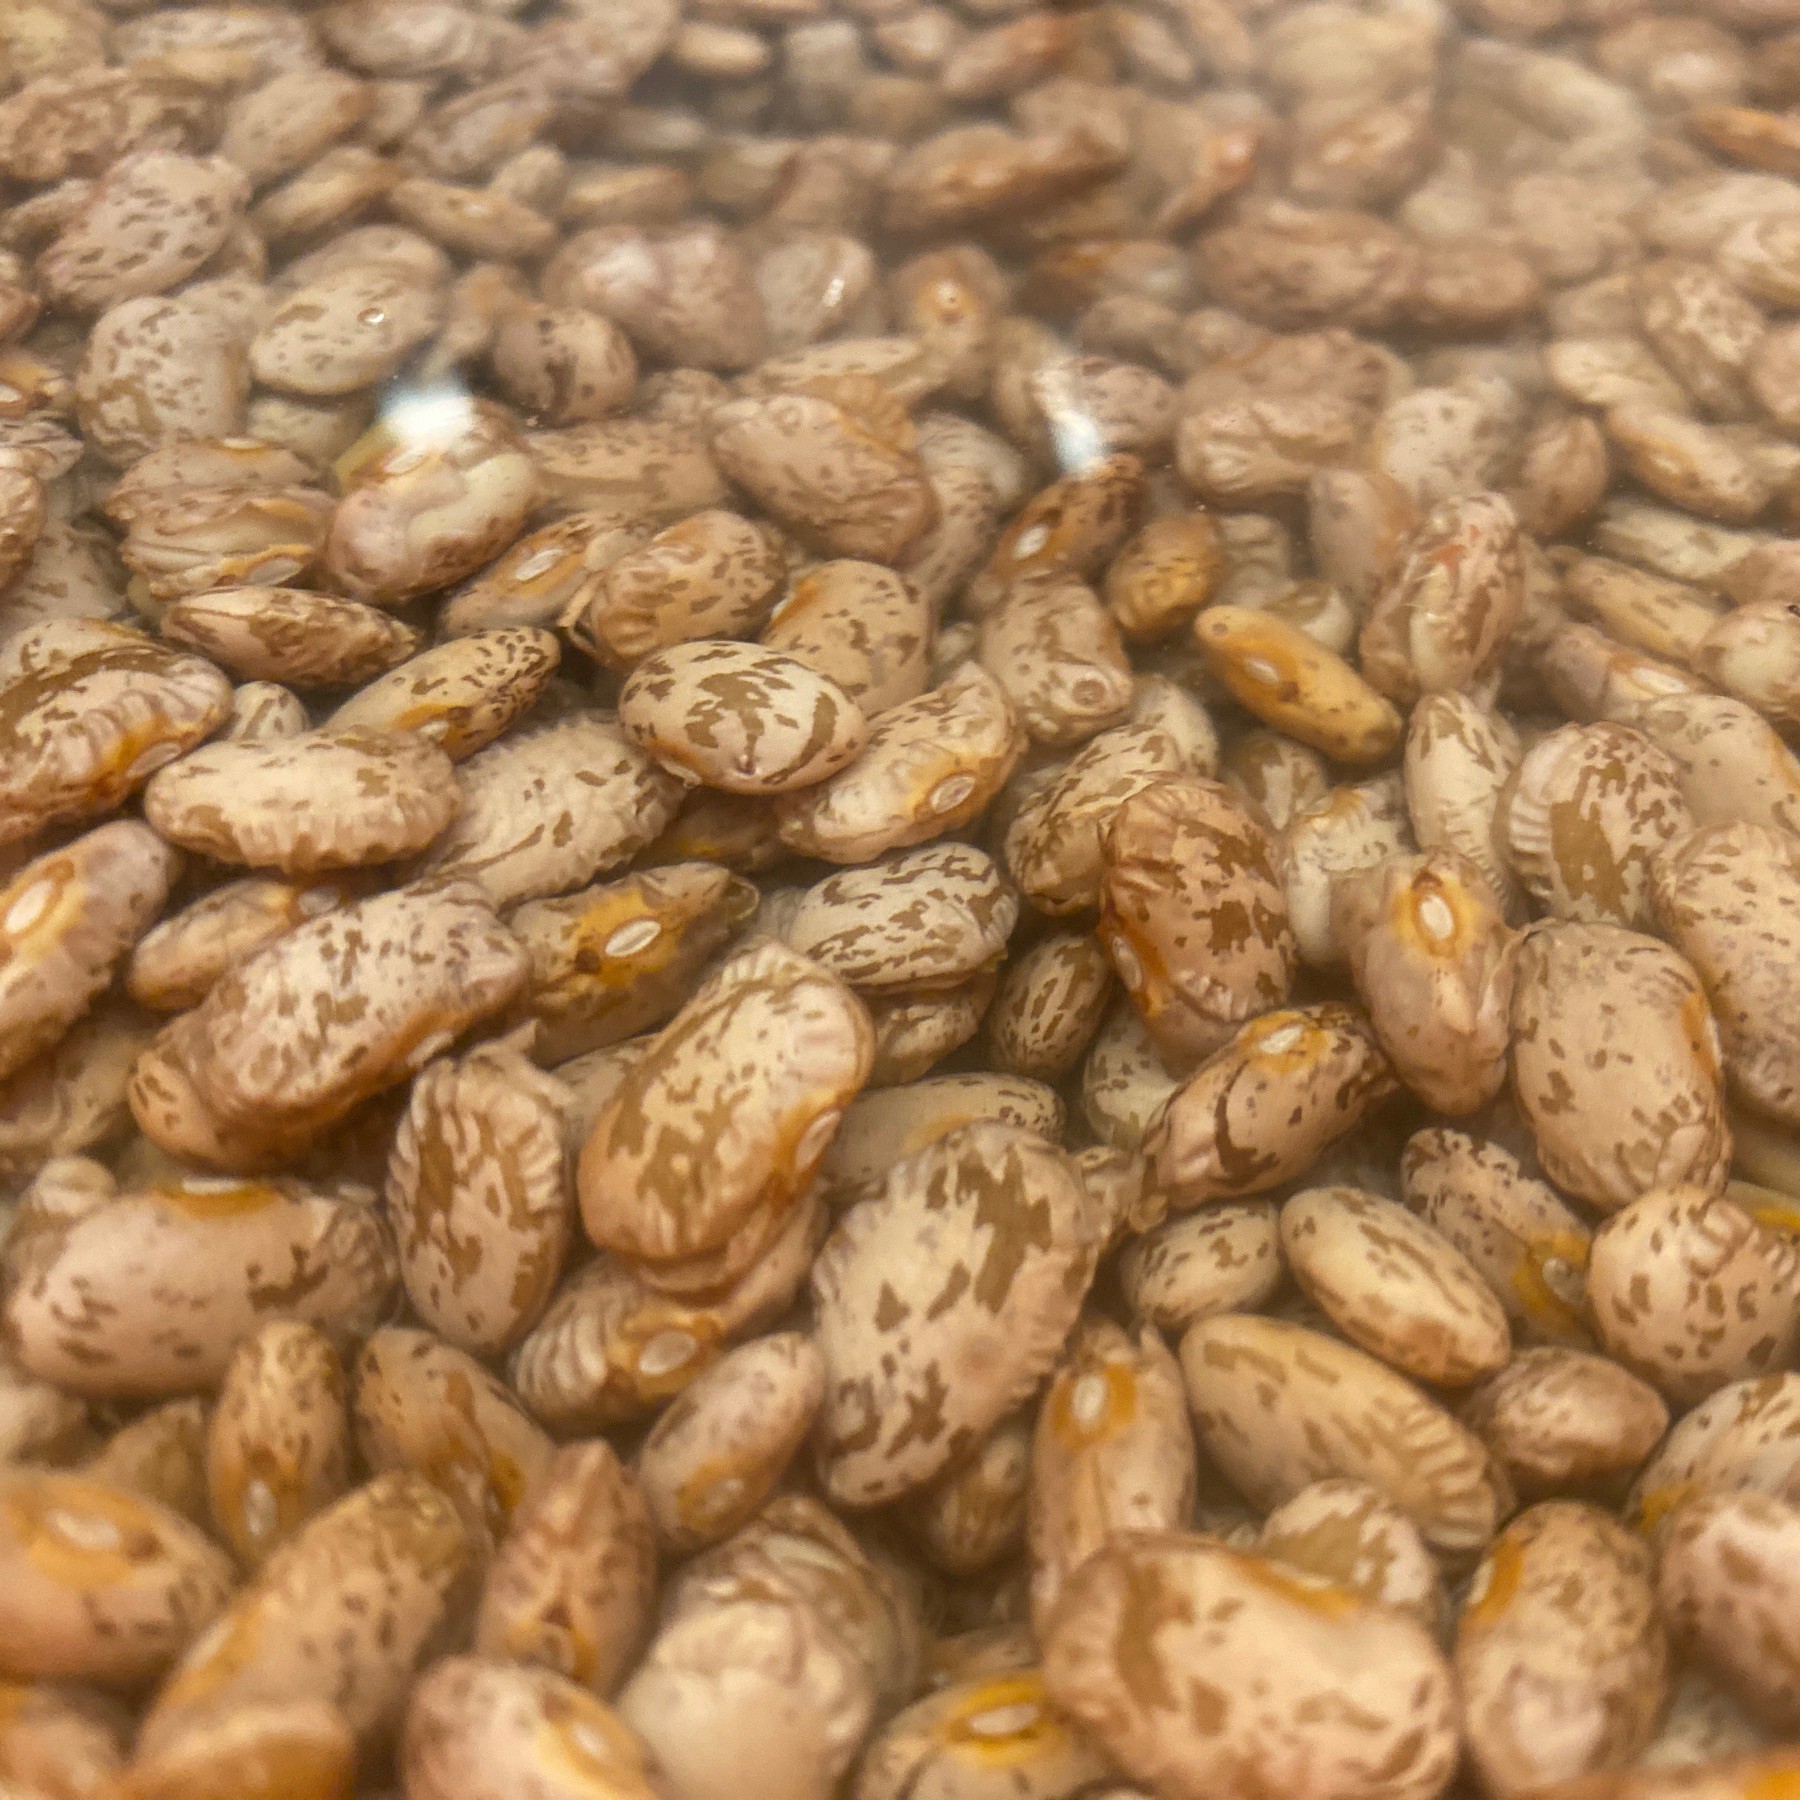 Pinto beans in water.